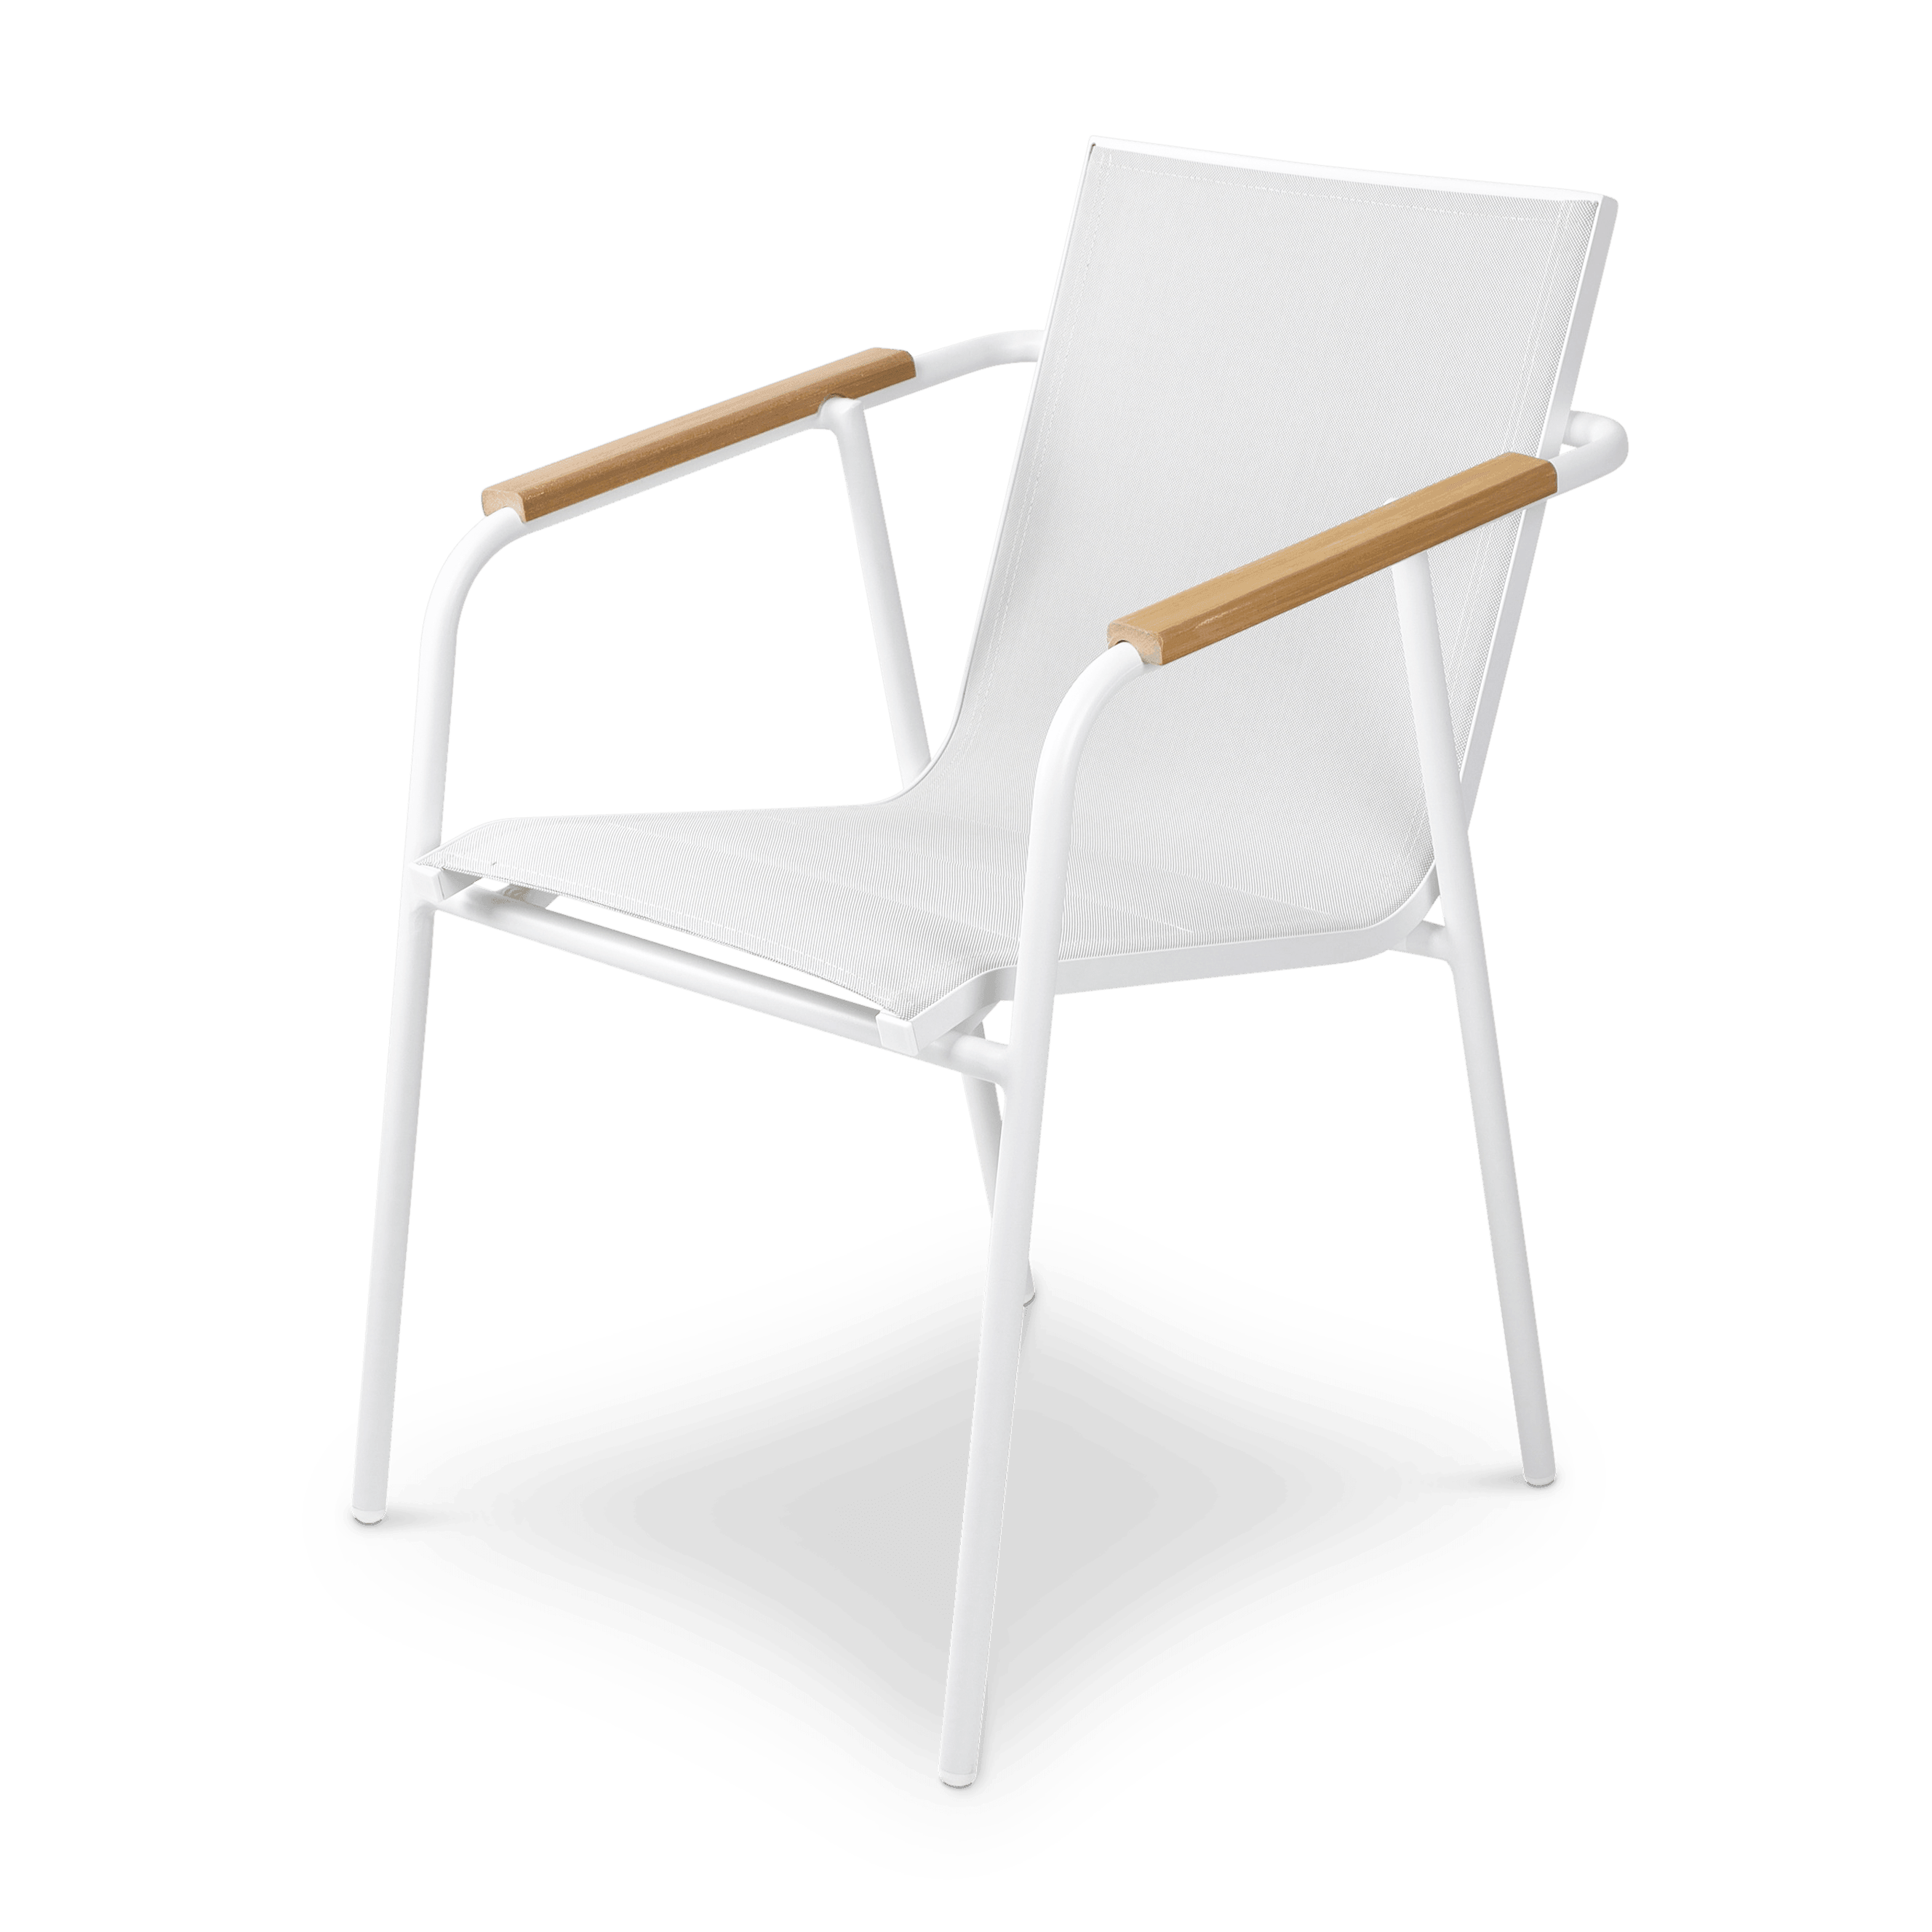 Capri Dining Chair in Arctic White Aluminium Frame with Polywood Teak Accent and Dune Textilene